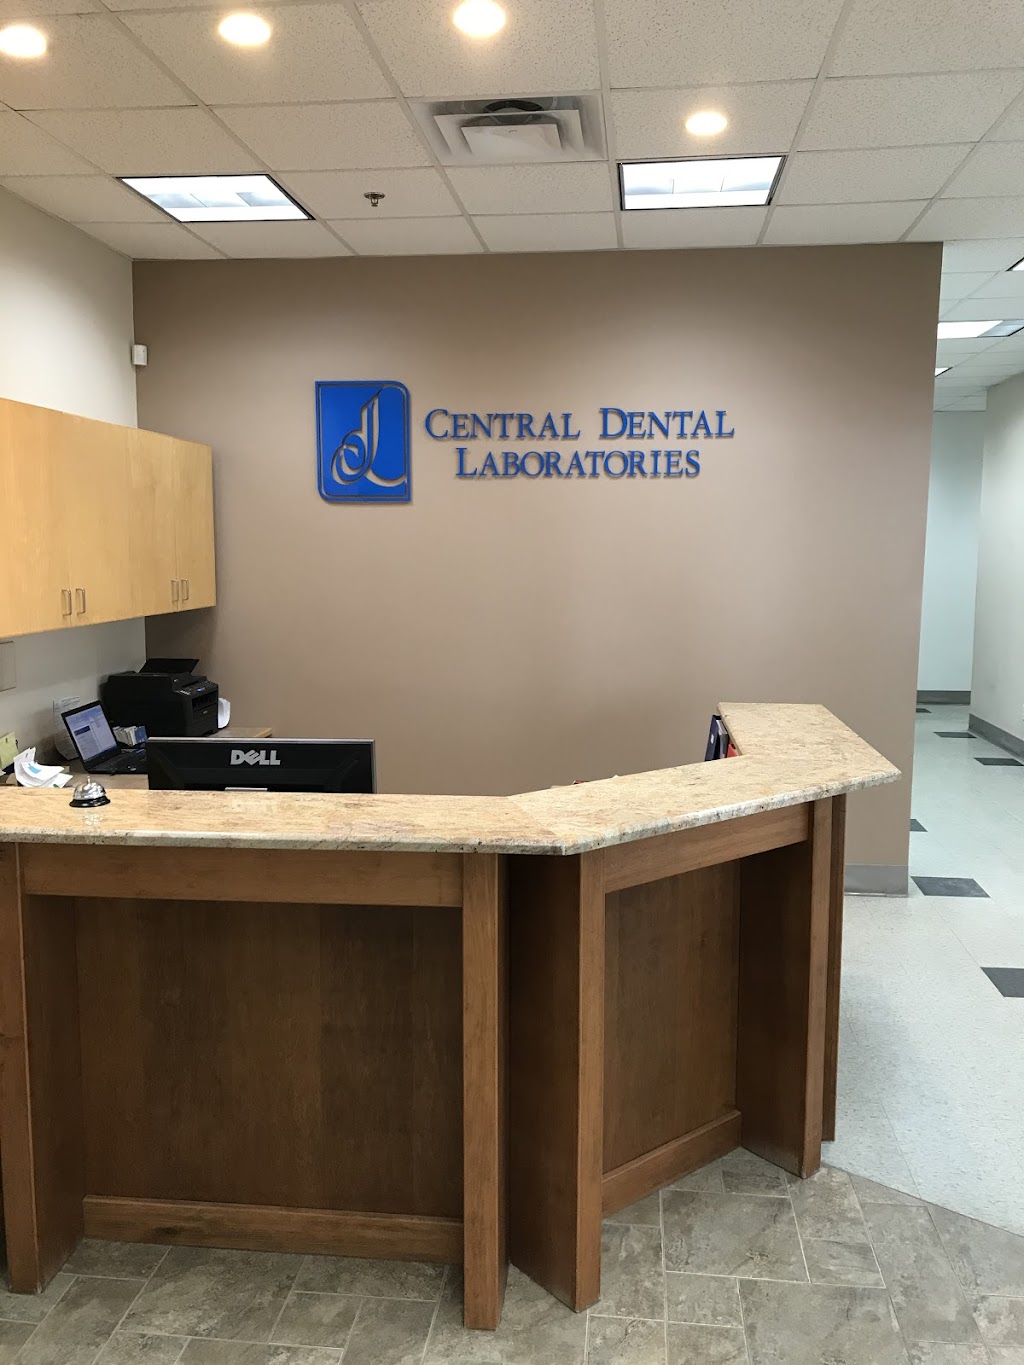 Central Dental Laboratory | 540 Armstrong Rd, Kingston, ON K7M 7N8, Canada | Phone: (613) 634-4391